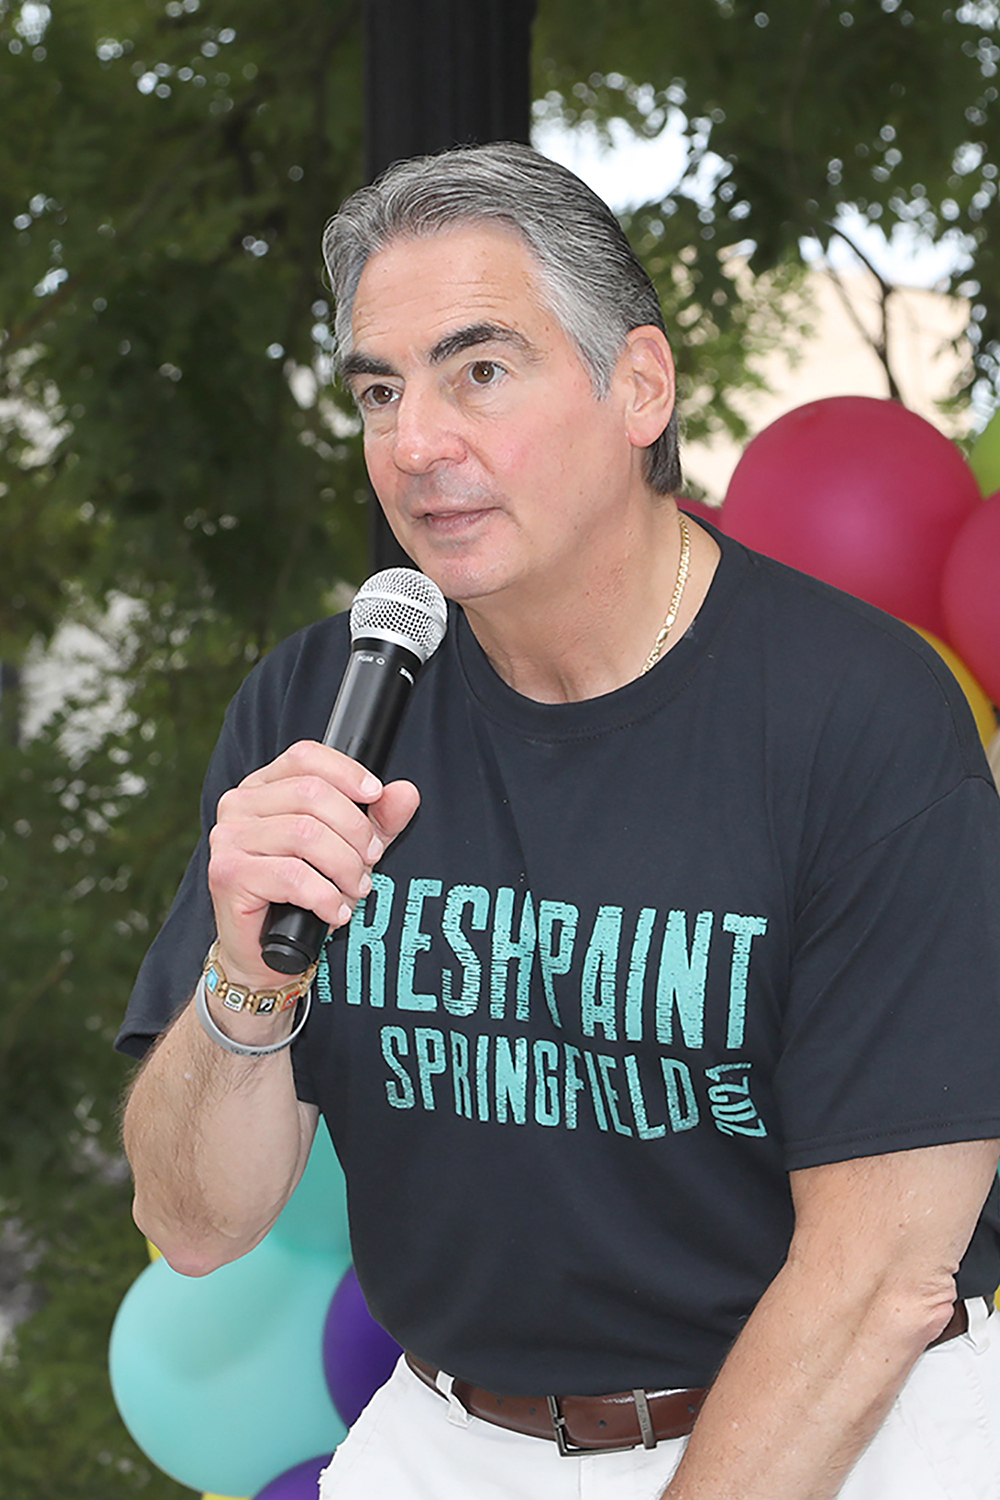 Springfield Mayor Domenic Sarno thanked participants for creating the Chalk for Change event at Springfield’s Court Square on July 16th. (Ed Cohen Photo)